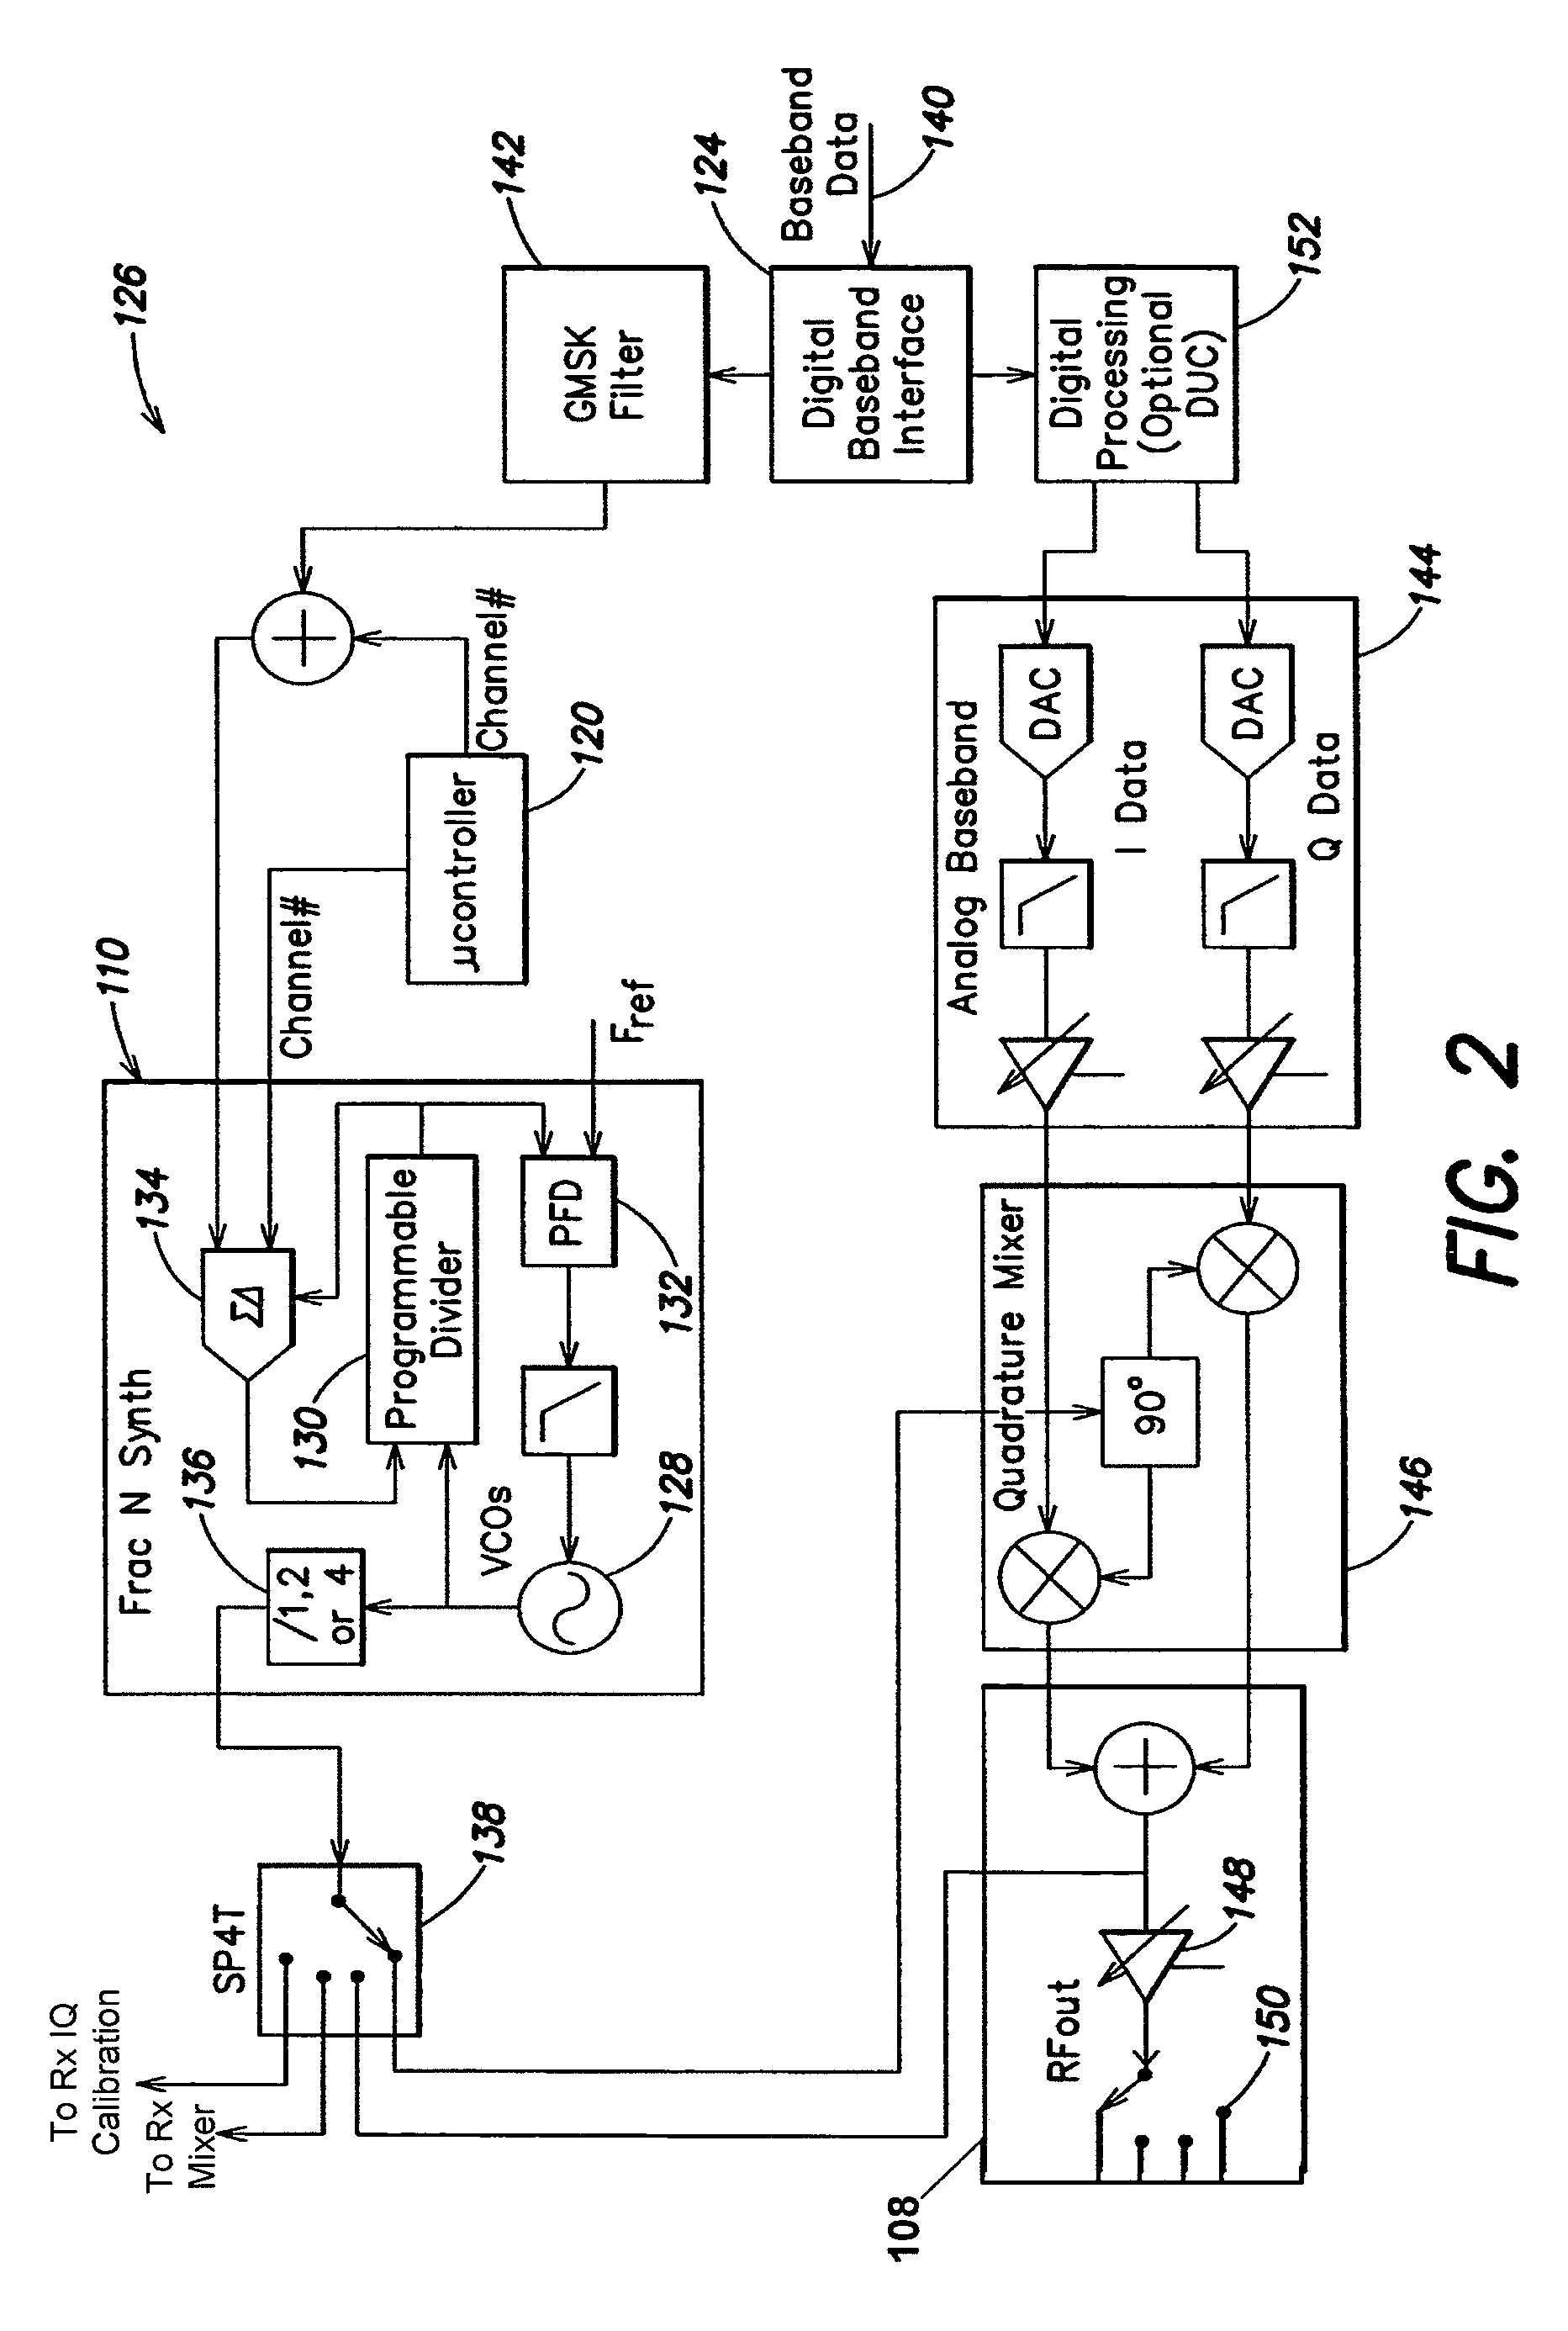 Programmable transmitter architecture for non-constant and constant envelope modulation